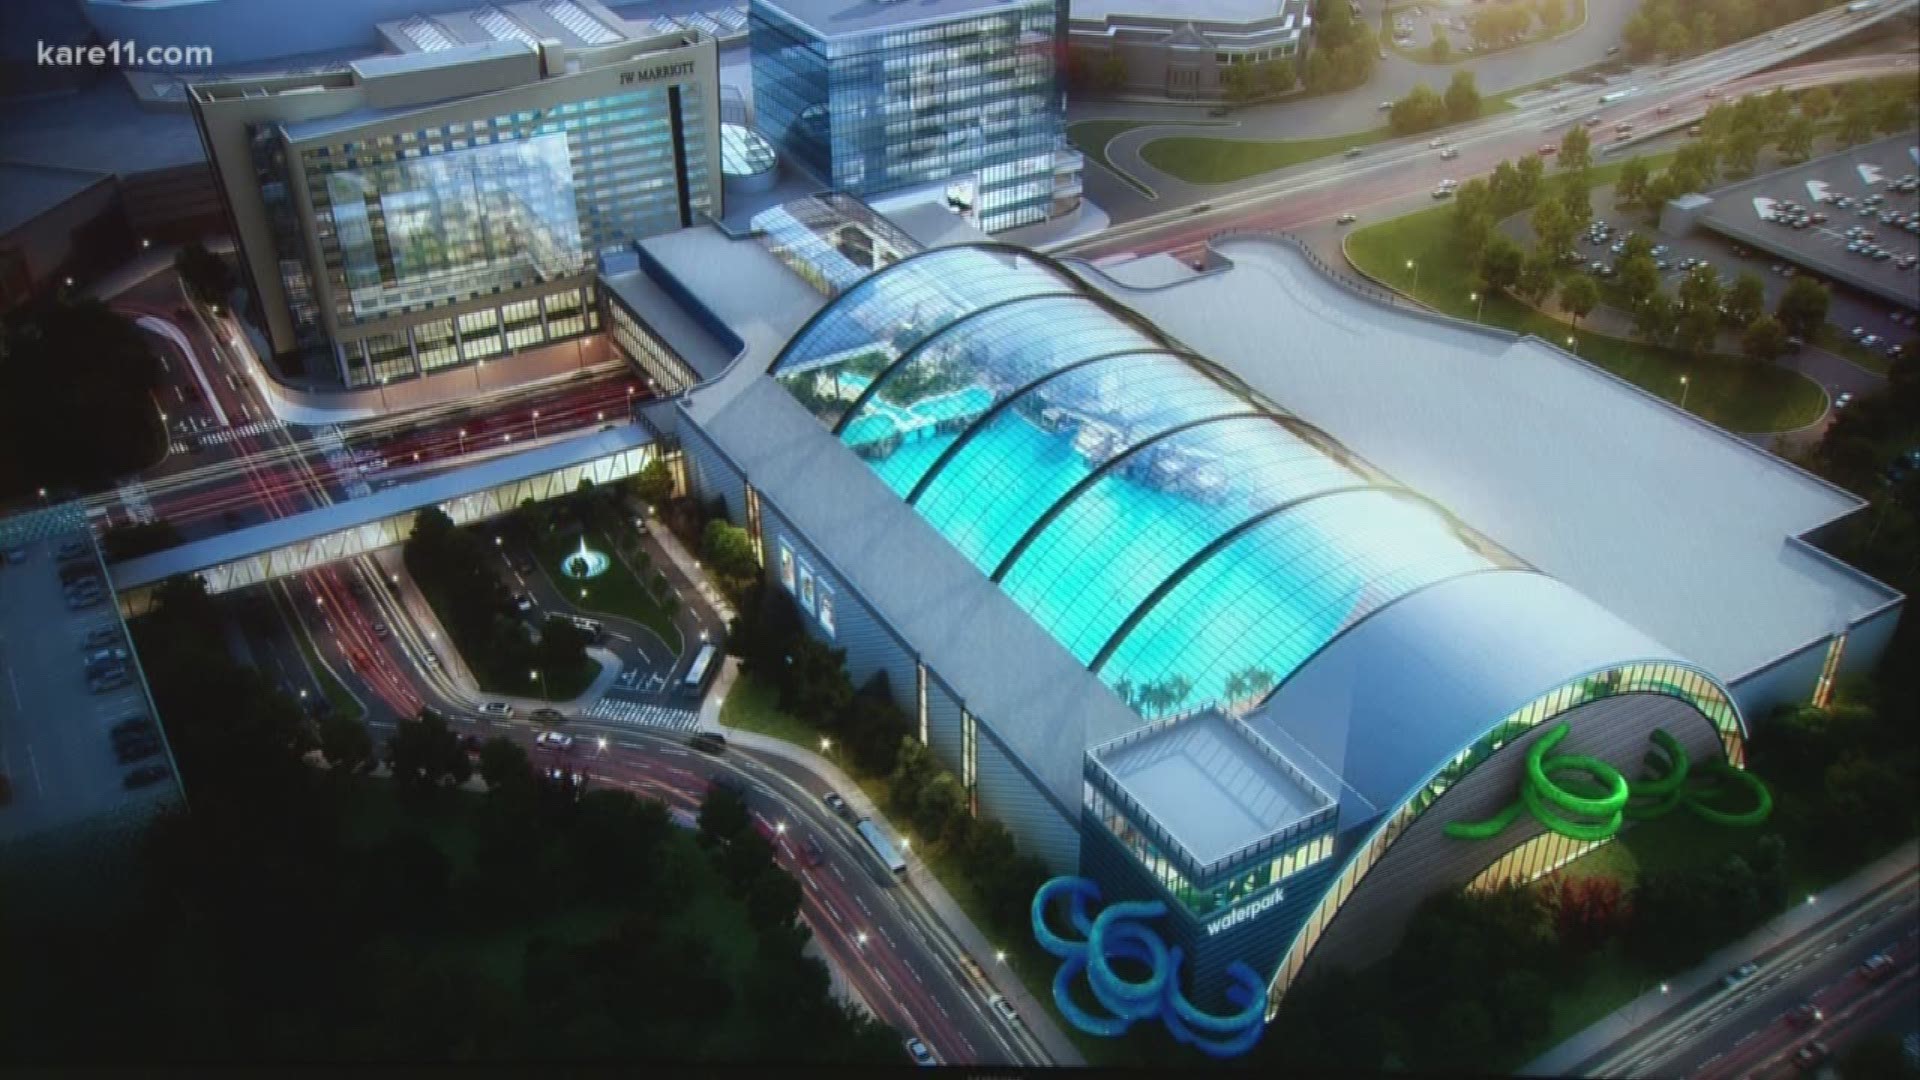 The city of Bloomington and MOA are moving forward with plans to construct one of the biggest indoor waterparks in the country. KARE 11's Lou Raguse looks at the details of the plan - and who would pay for it. https://kare11.tv/2DfcHTQ